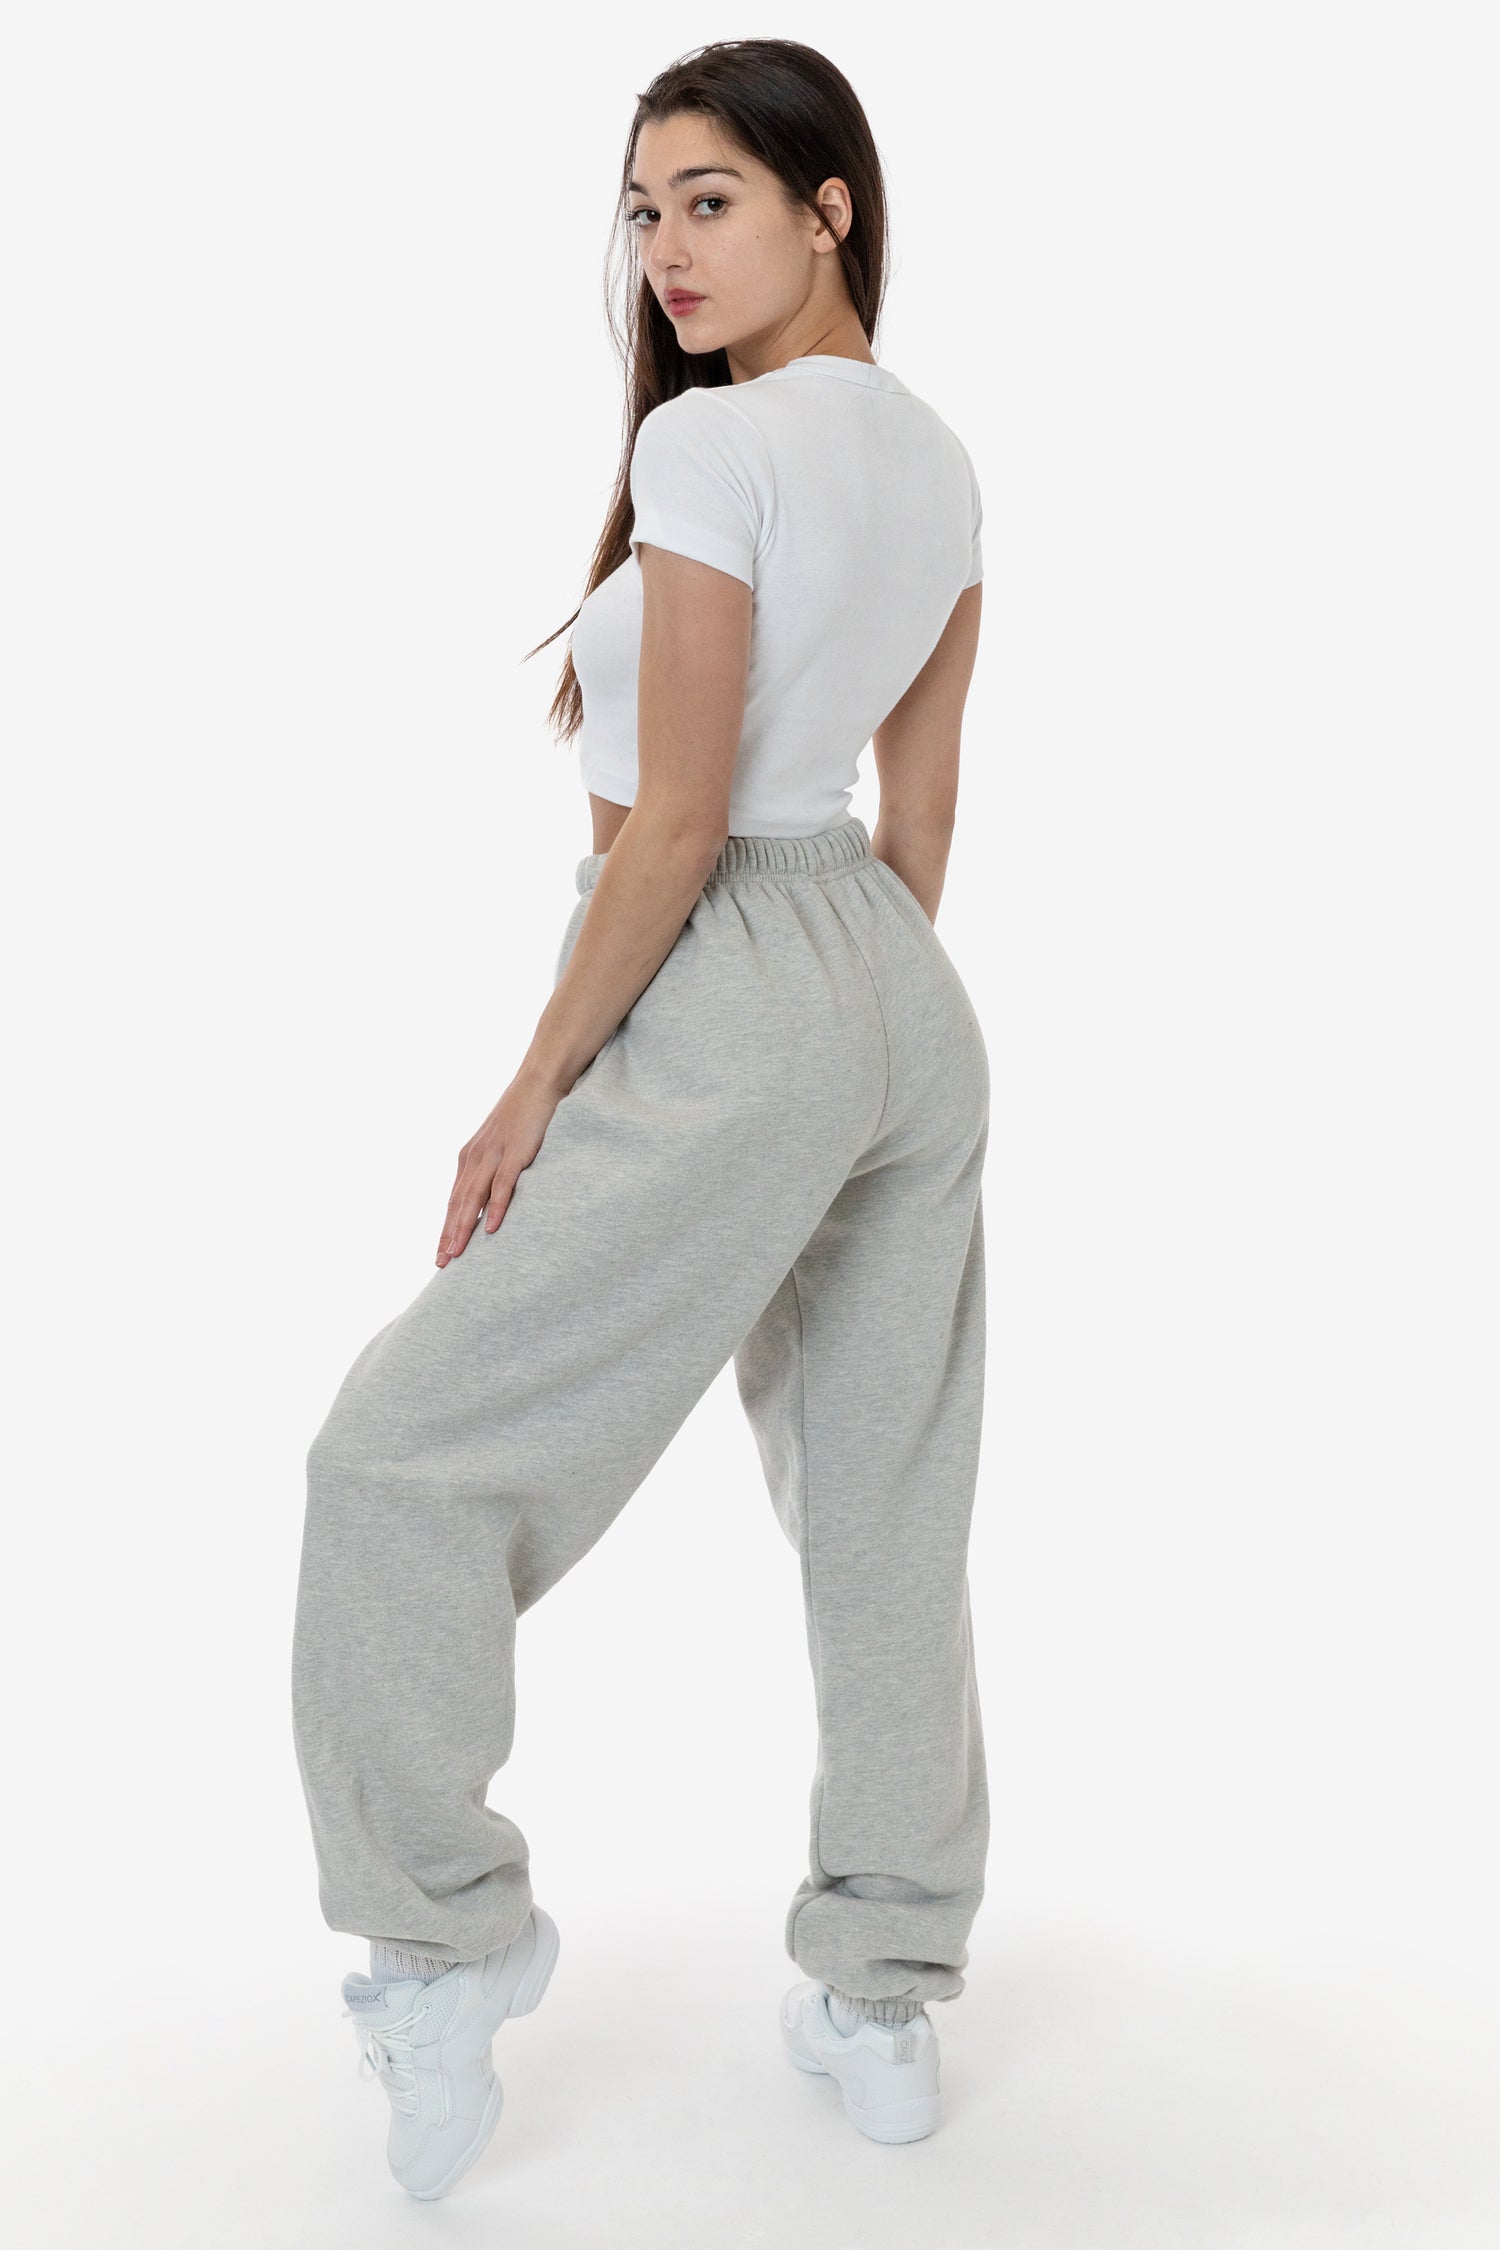 Trending Wholesale sweatpants women factory At Affordable Prices –